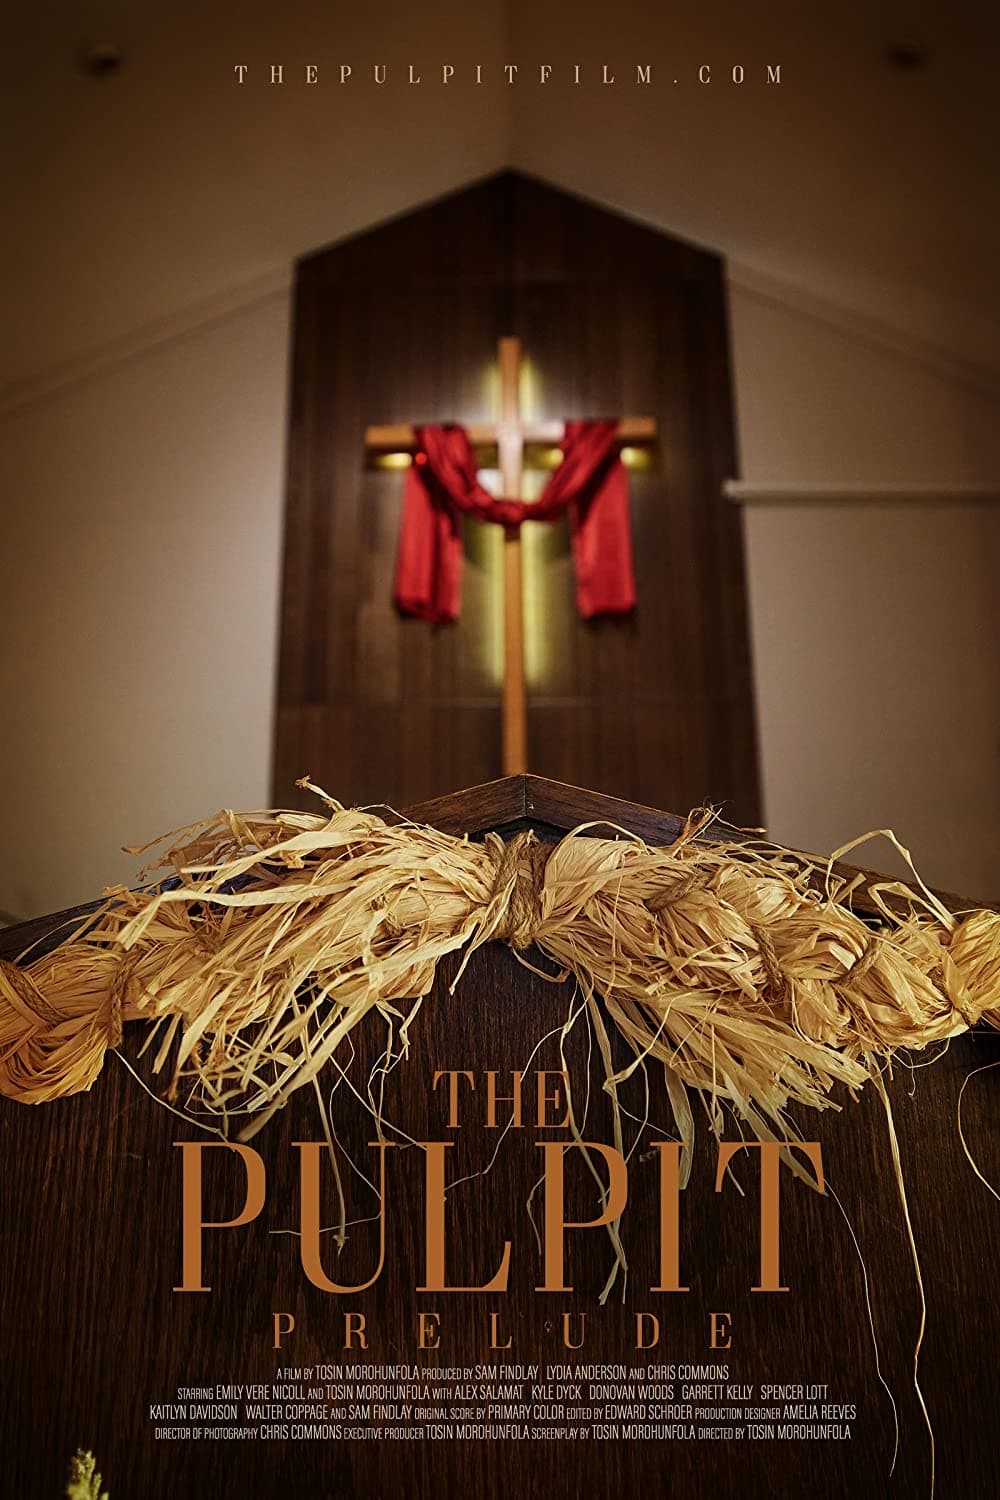 The Pulpit - Prelude